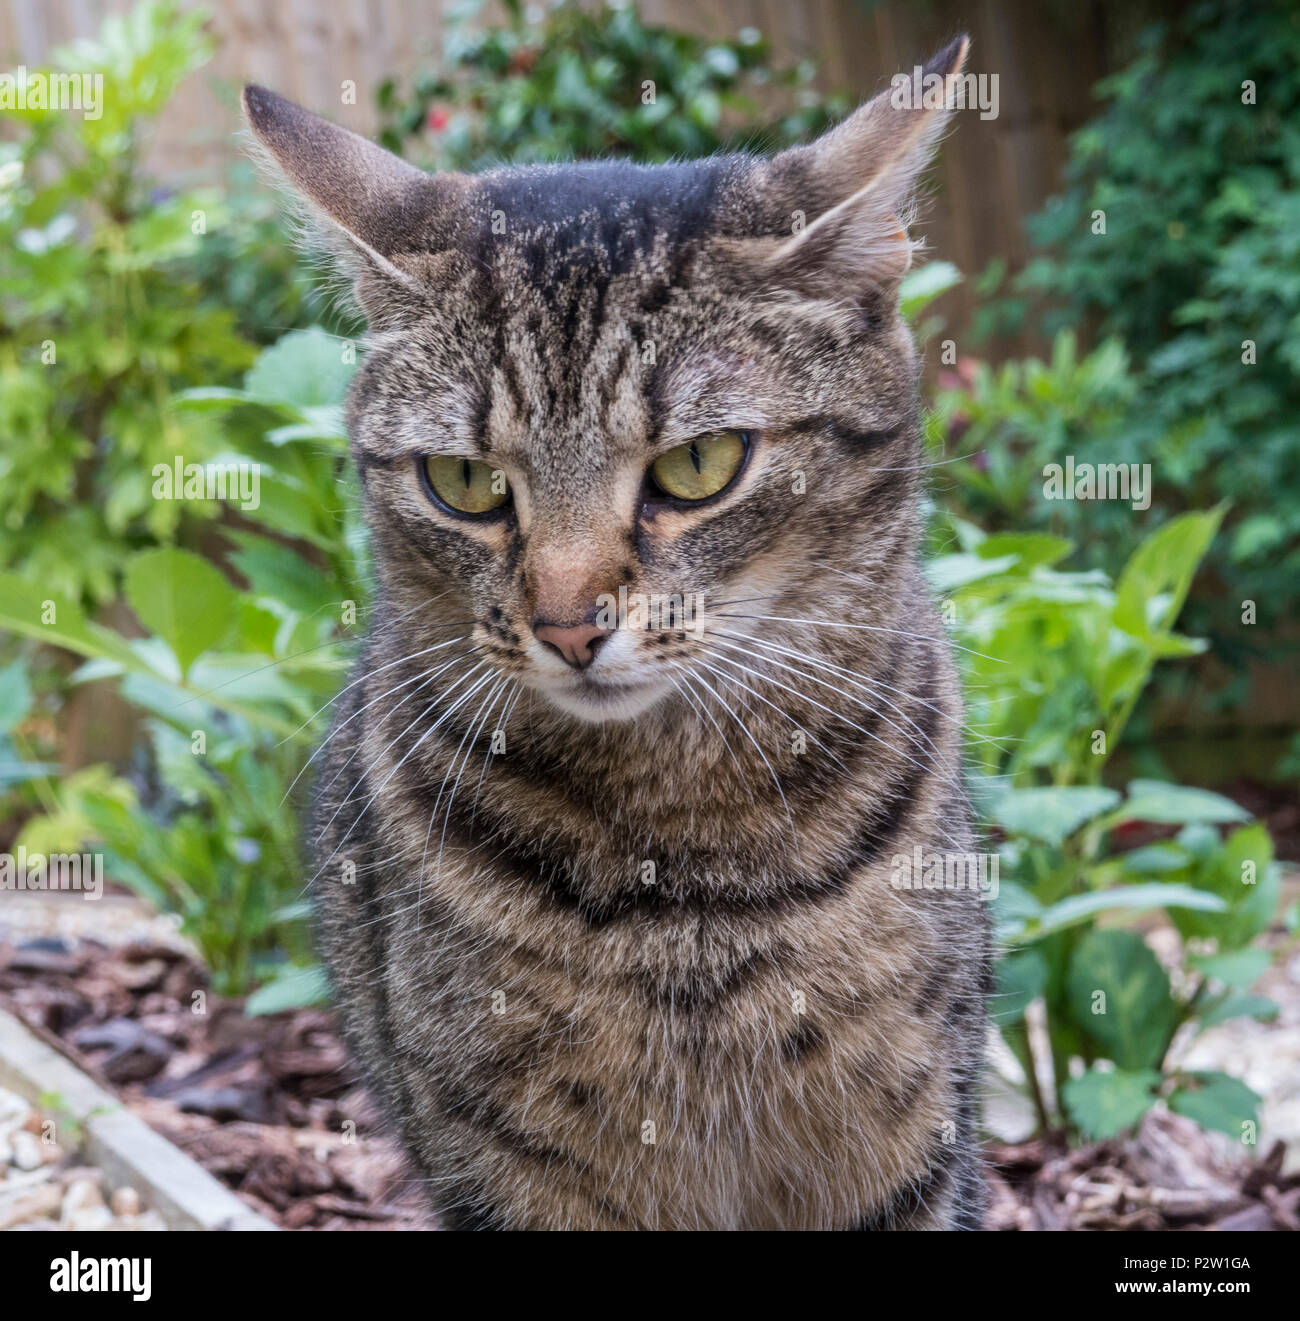 Tabby cat, bengal cat, head shot, head and shoulders, outside in a garden, Stock Photo